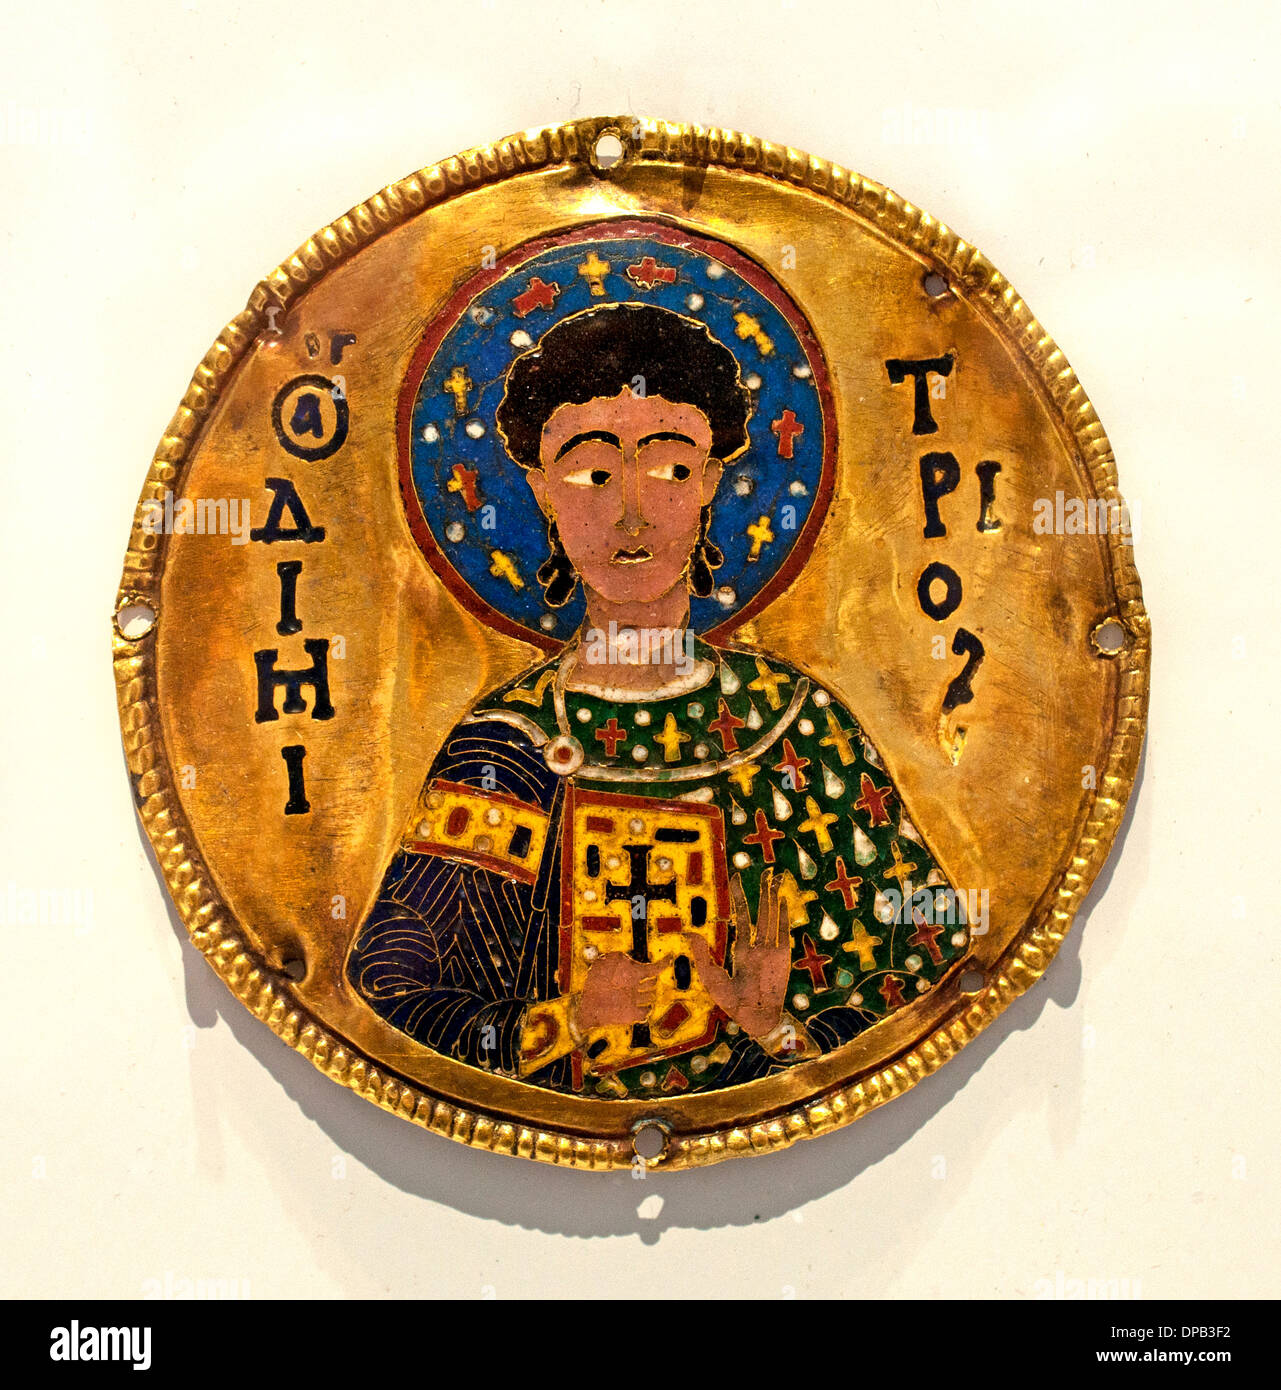 medallion decorated with a frame icon: St. Demetrios Constantinople (now Istanbul Turkey today) around 1100 gold and enamel Stock Photo